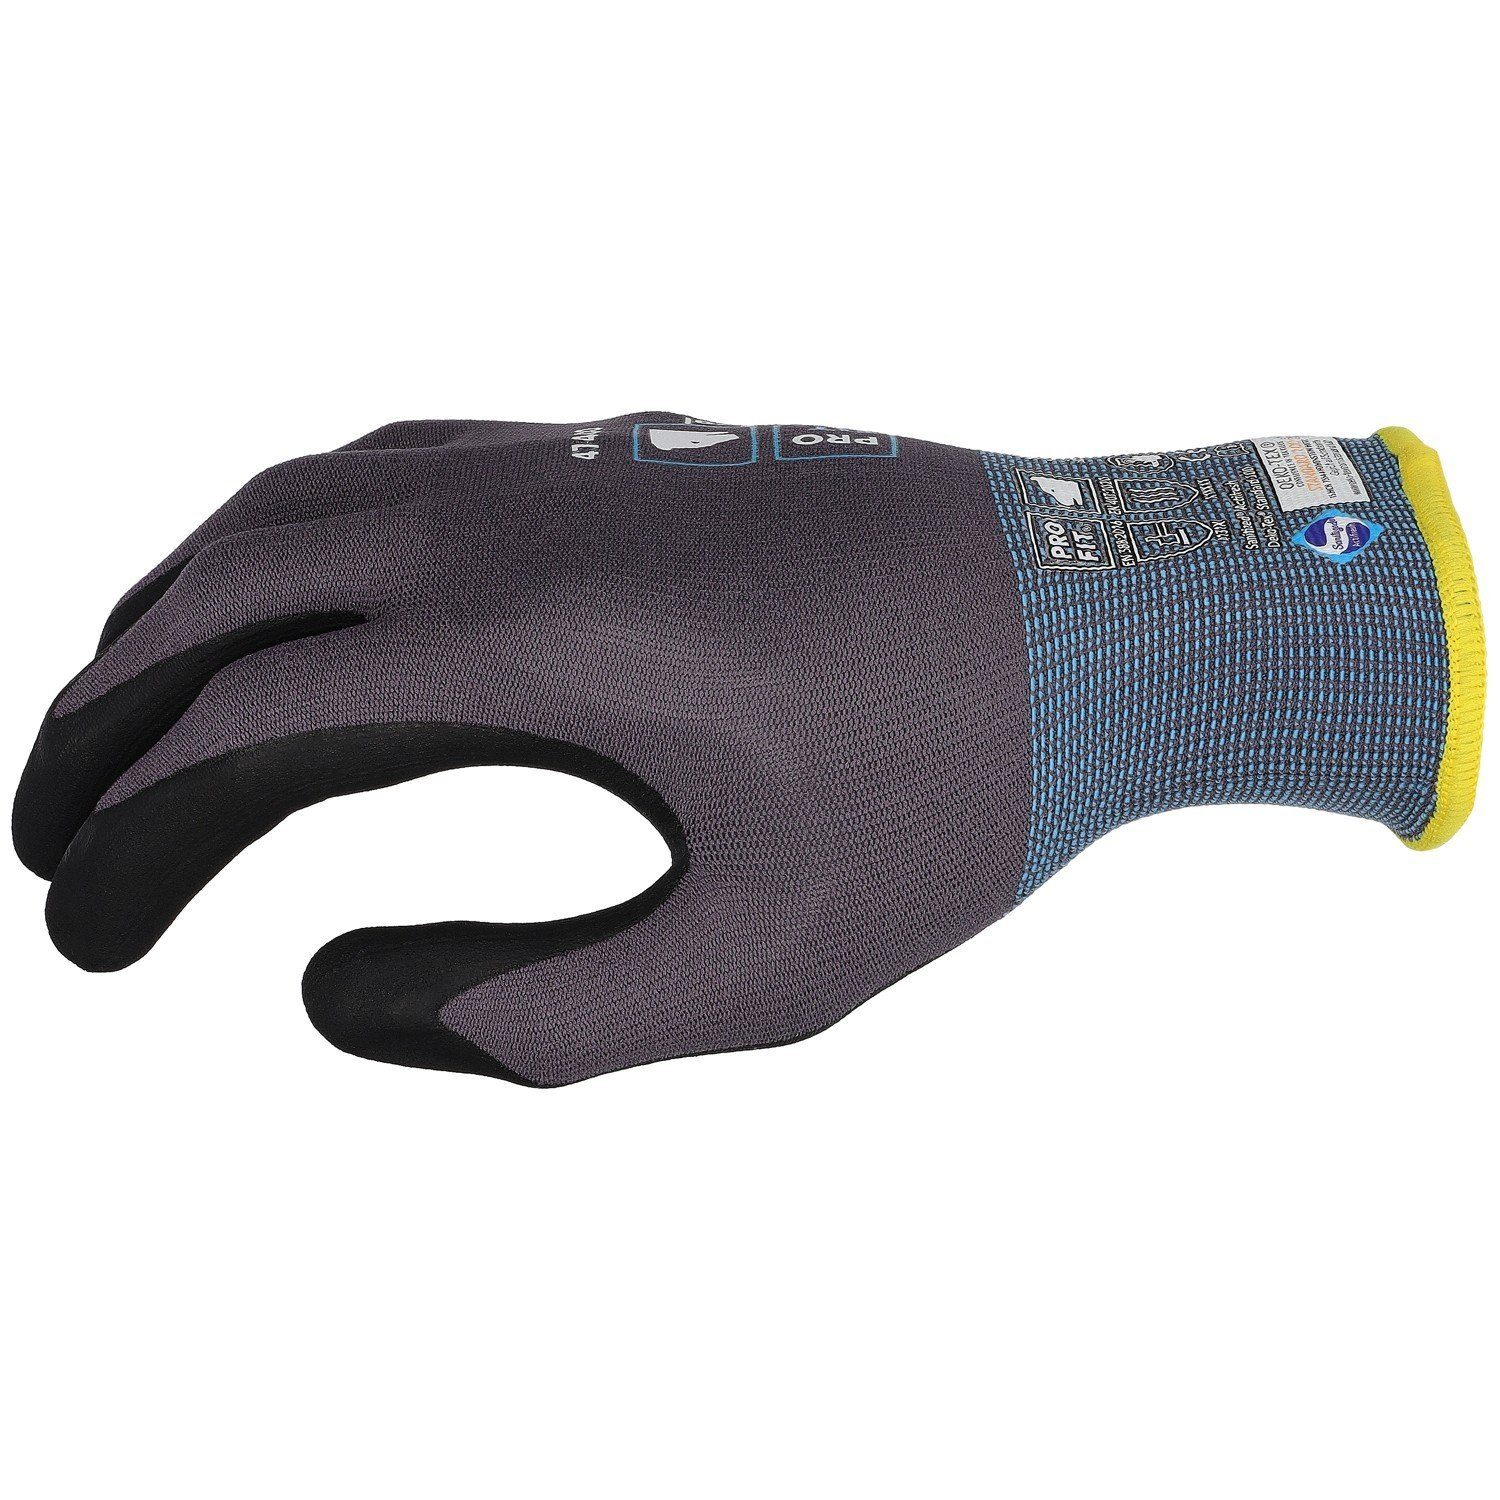 PRO FIT Paar) cool', Nitril sc 'Maxim Handschuhe, FIT grau Fitzner Montage-Handschuhe PRO Sanitized® (12, by 